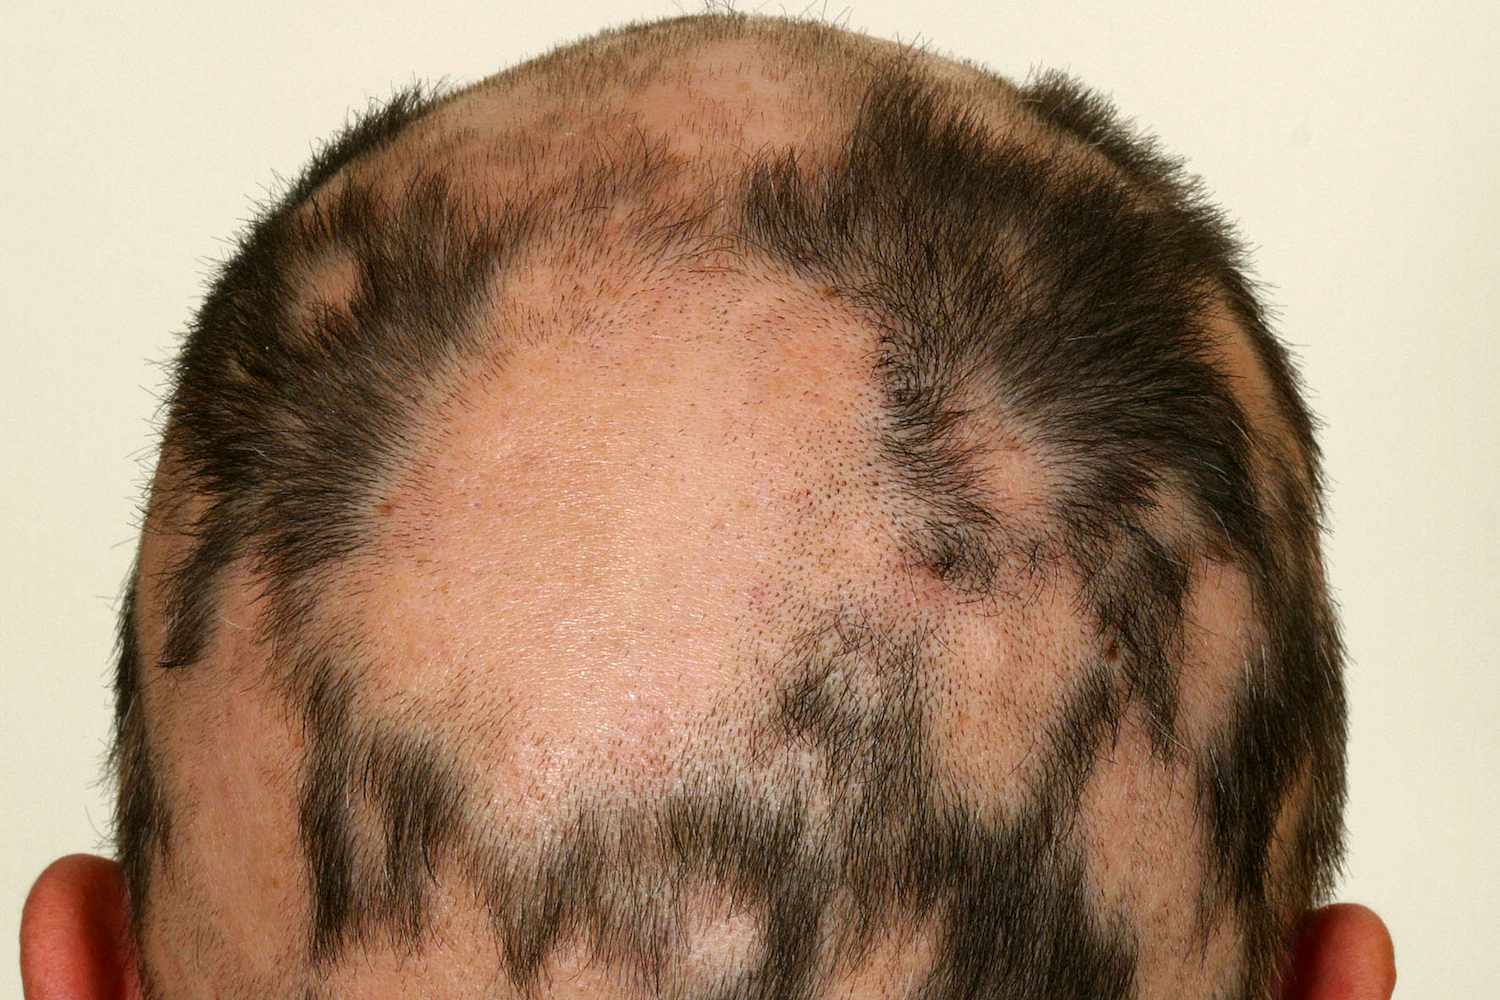 Alopecia areata-Causes-Diagnosis-Best treatment options-Best Homeopathic doctor in Pakistan-Dr Qaisar Ahmed